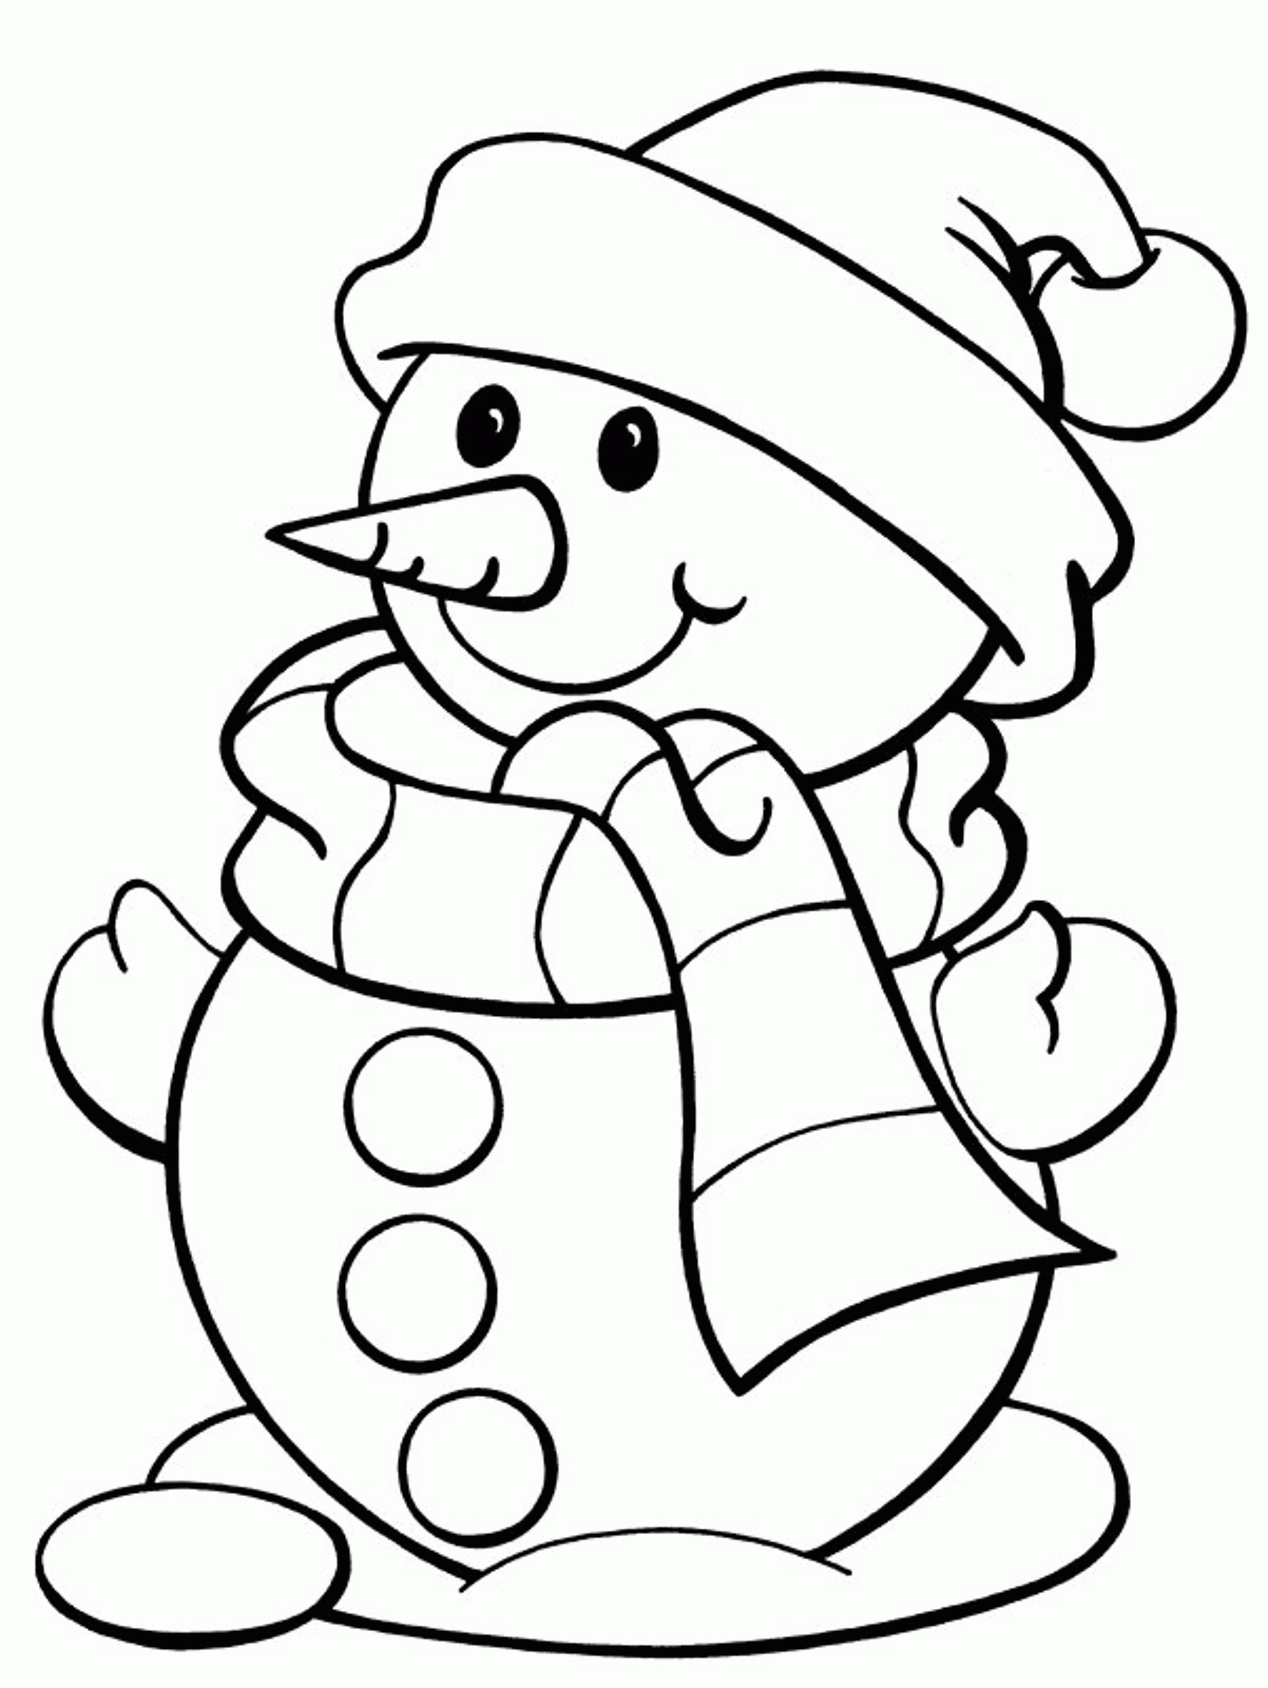 Winter Coloring Worksheets For Kindergarten   The Largest And Most ...